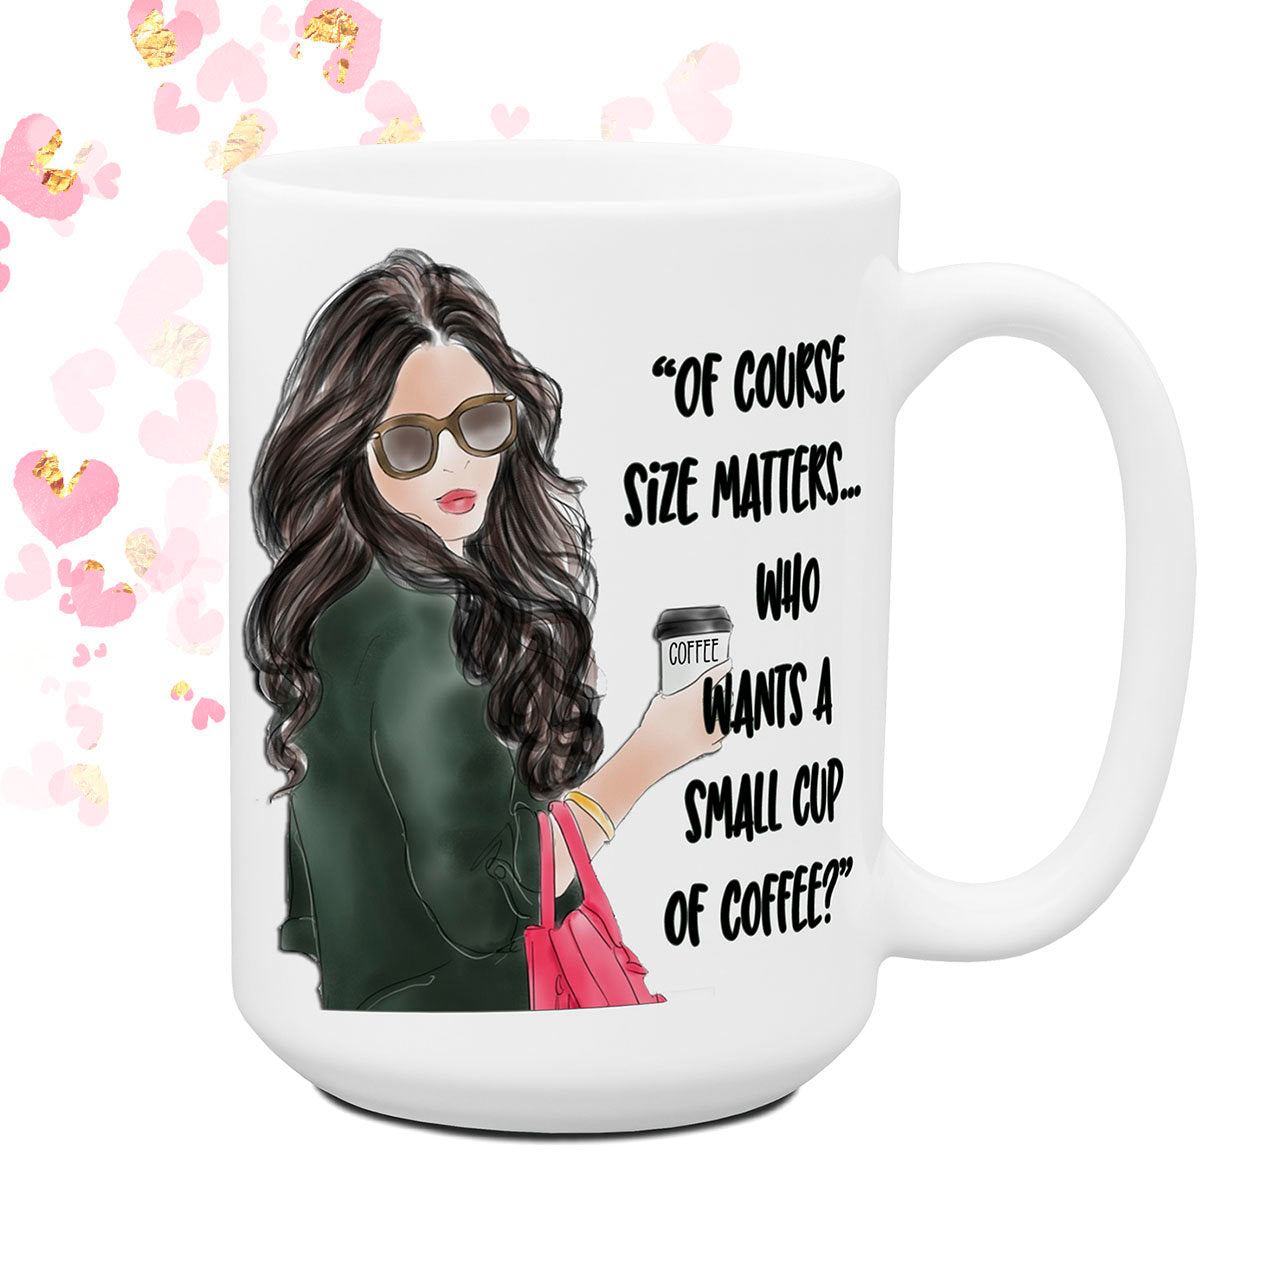 Of Course Size Matters Funny Mugs for Women Sassy Attitude Office Coworker Cup